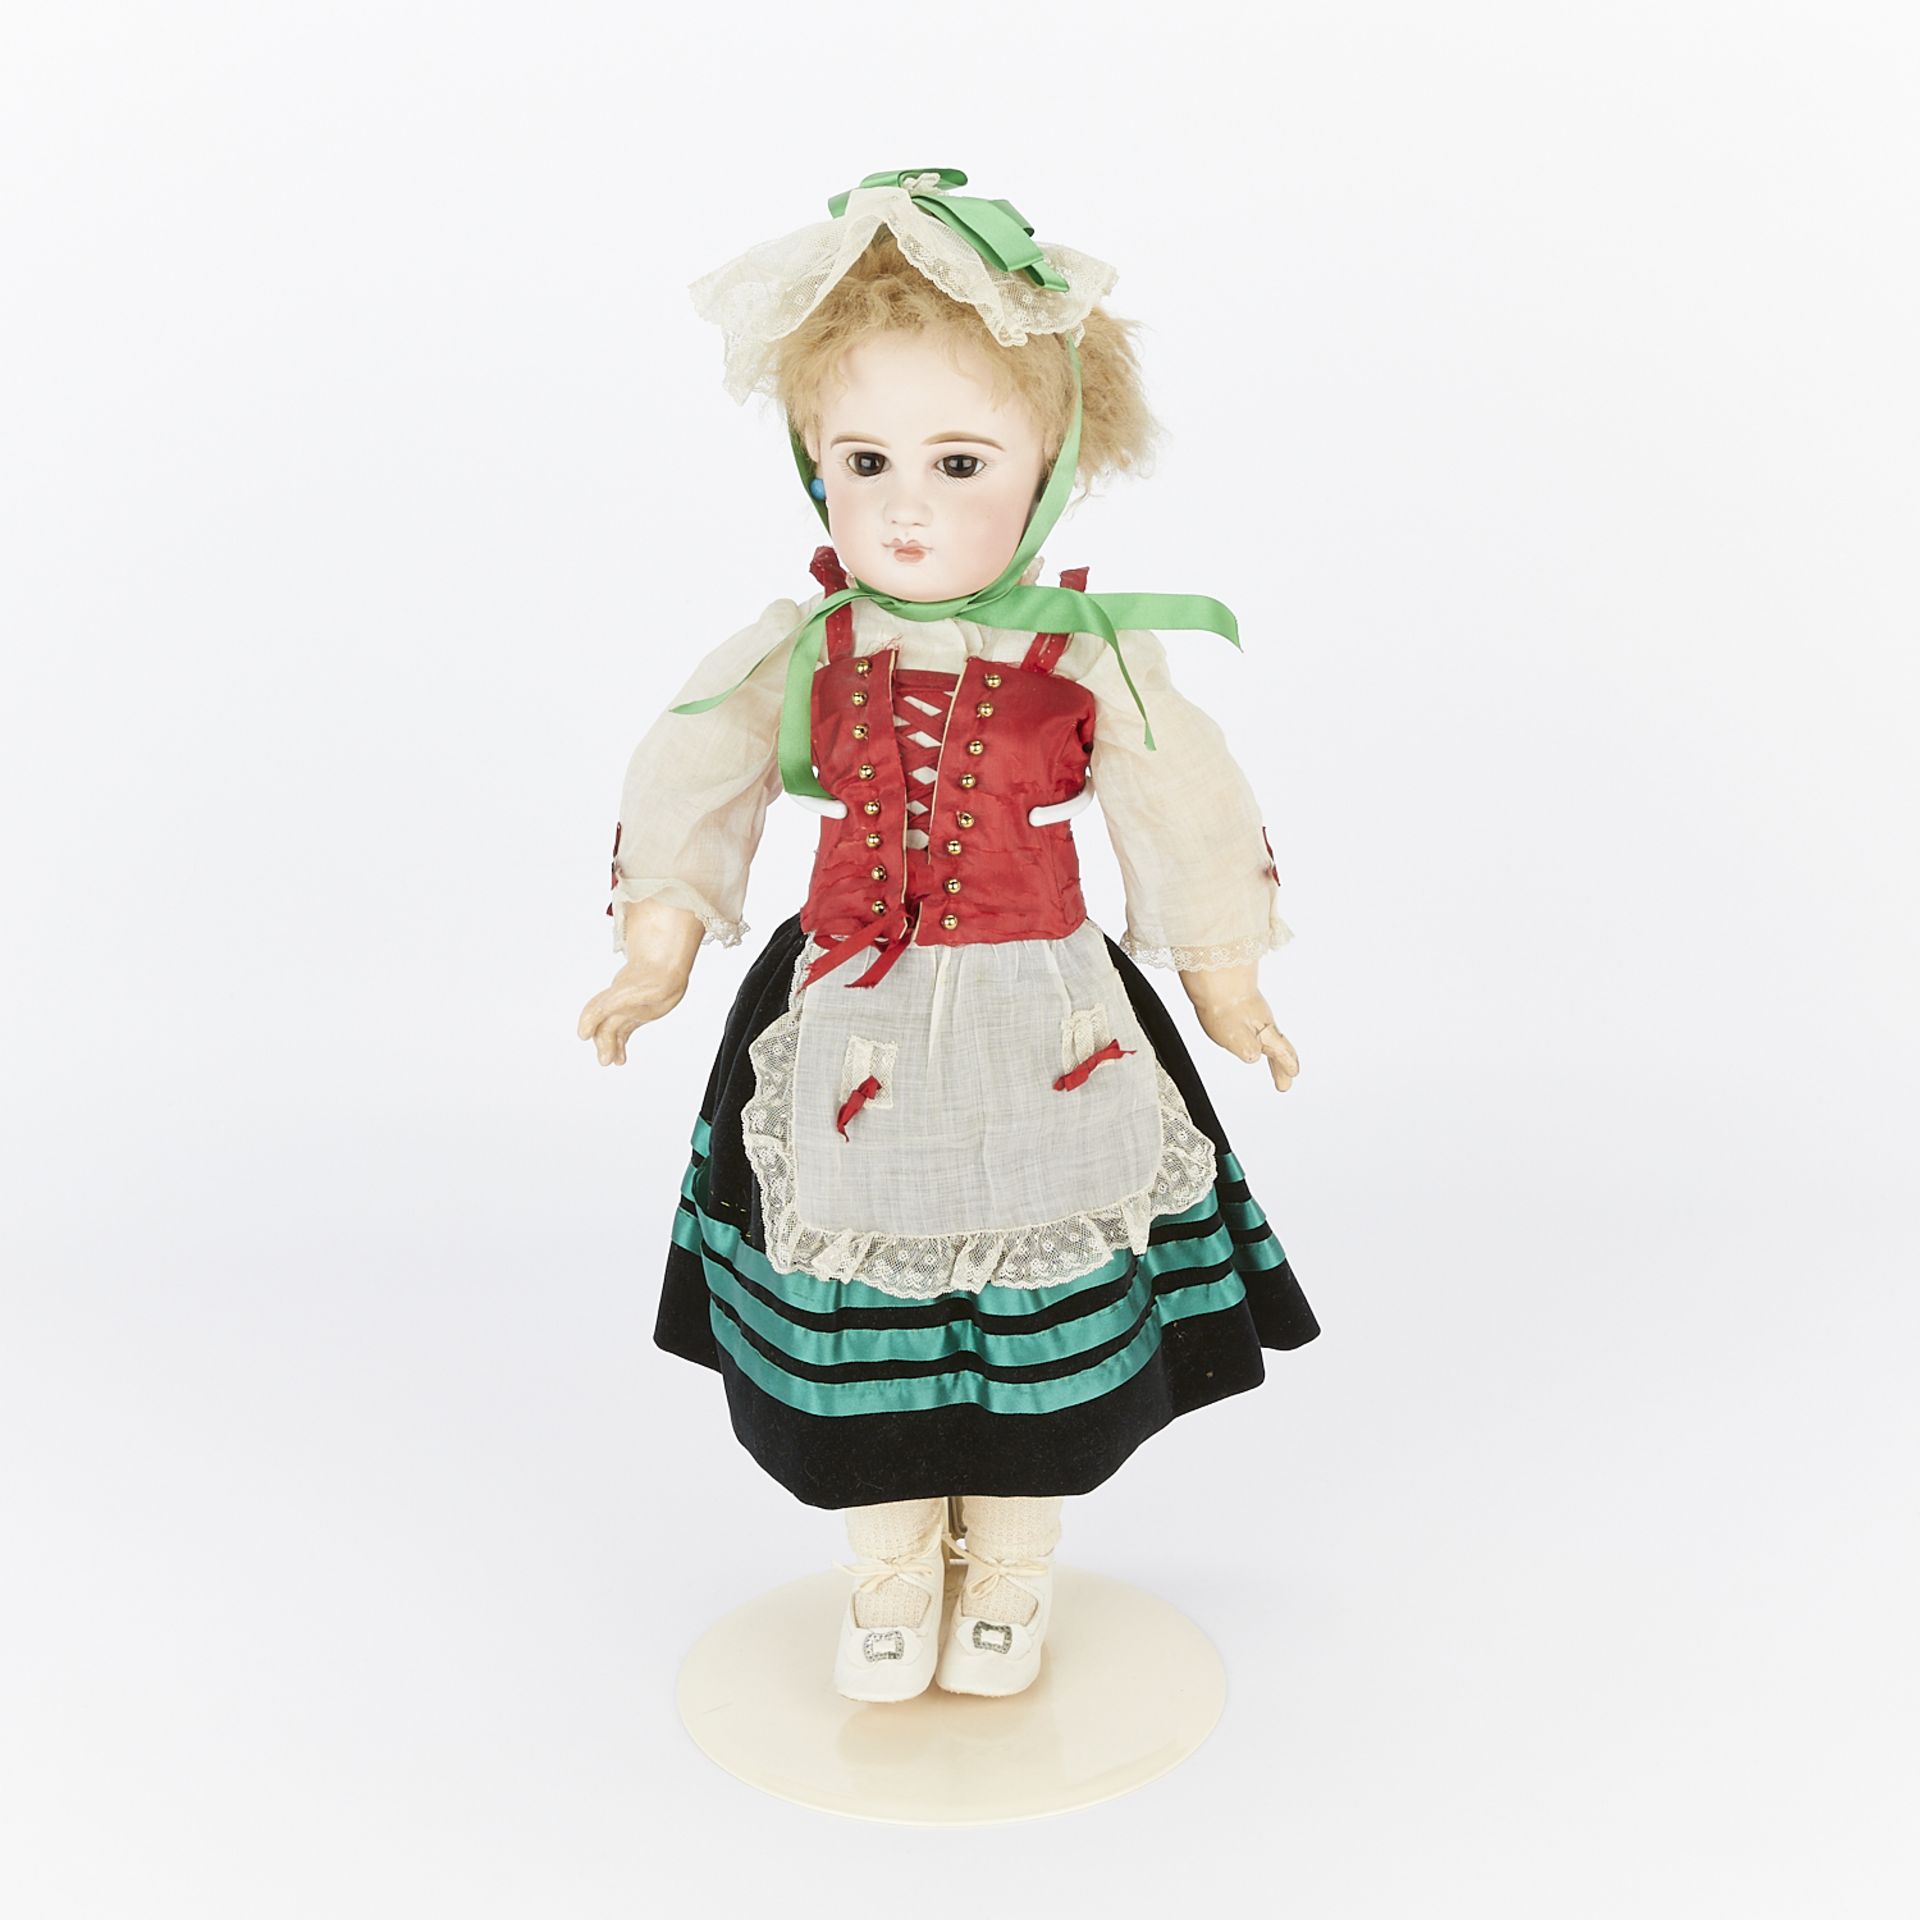 Jumeau French Porcelain Bisque Doll - Image 6 of 14